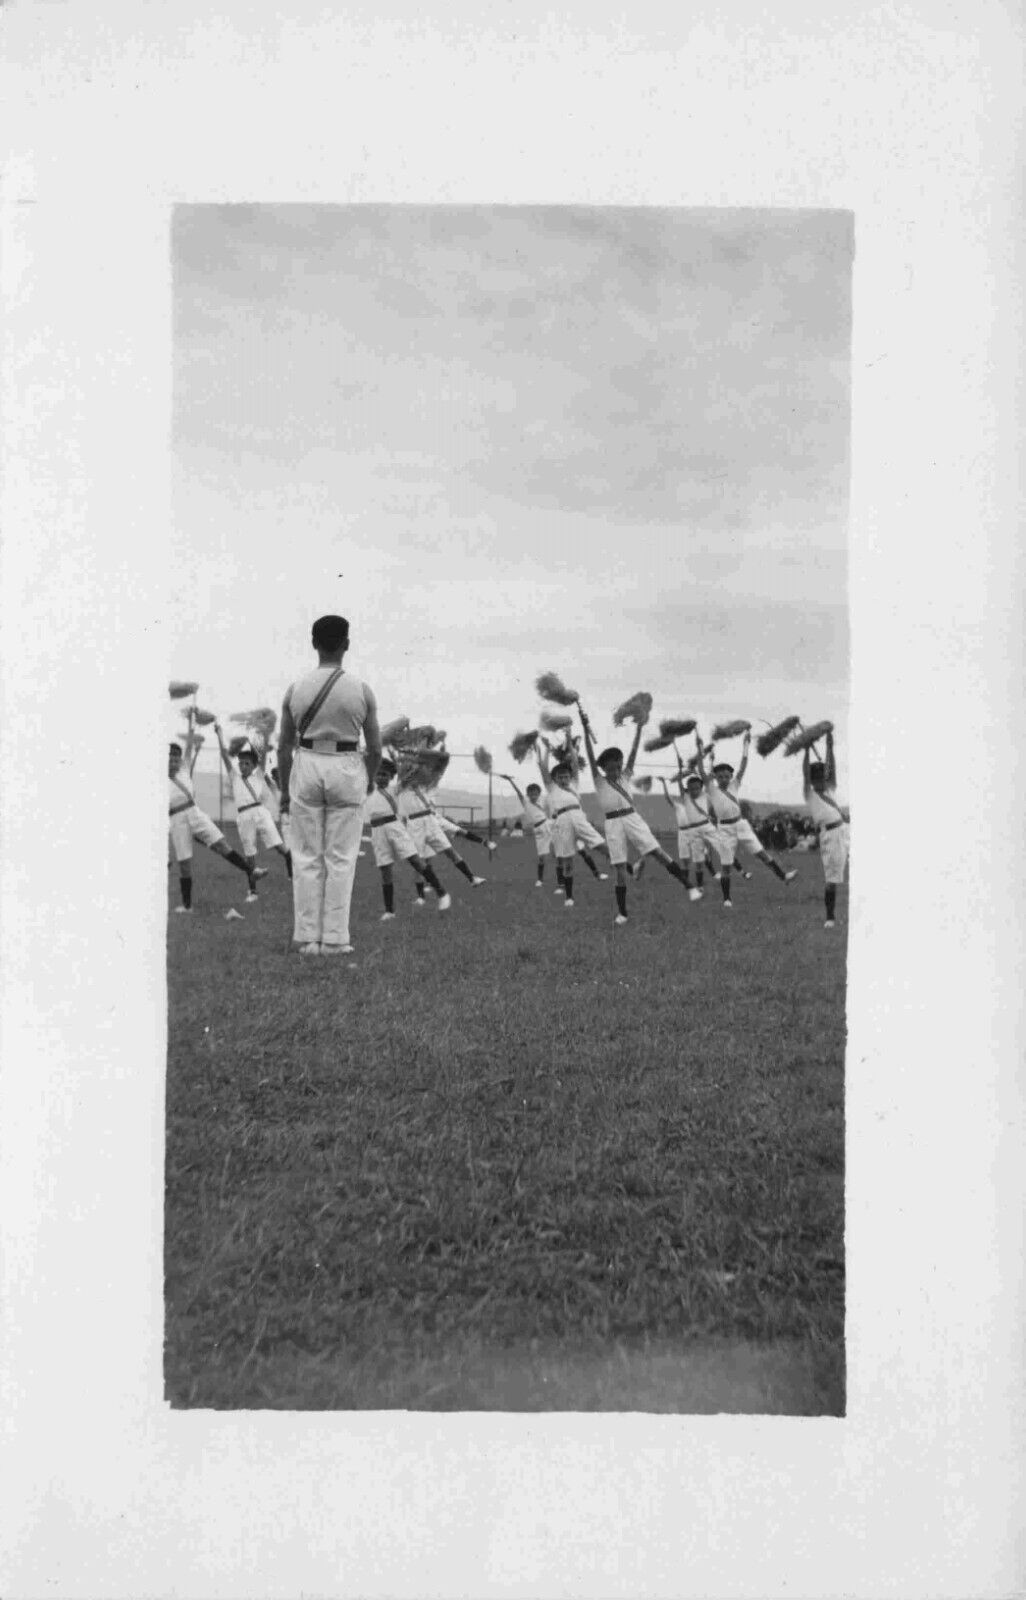 RPPC Cheerleaders with Pom Poms Practice with Coach Vintage Real Photo Postcard